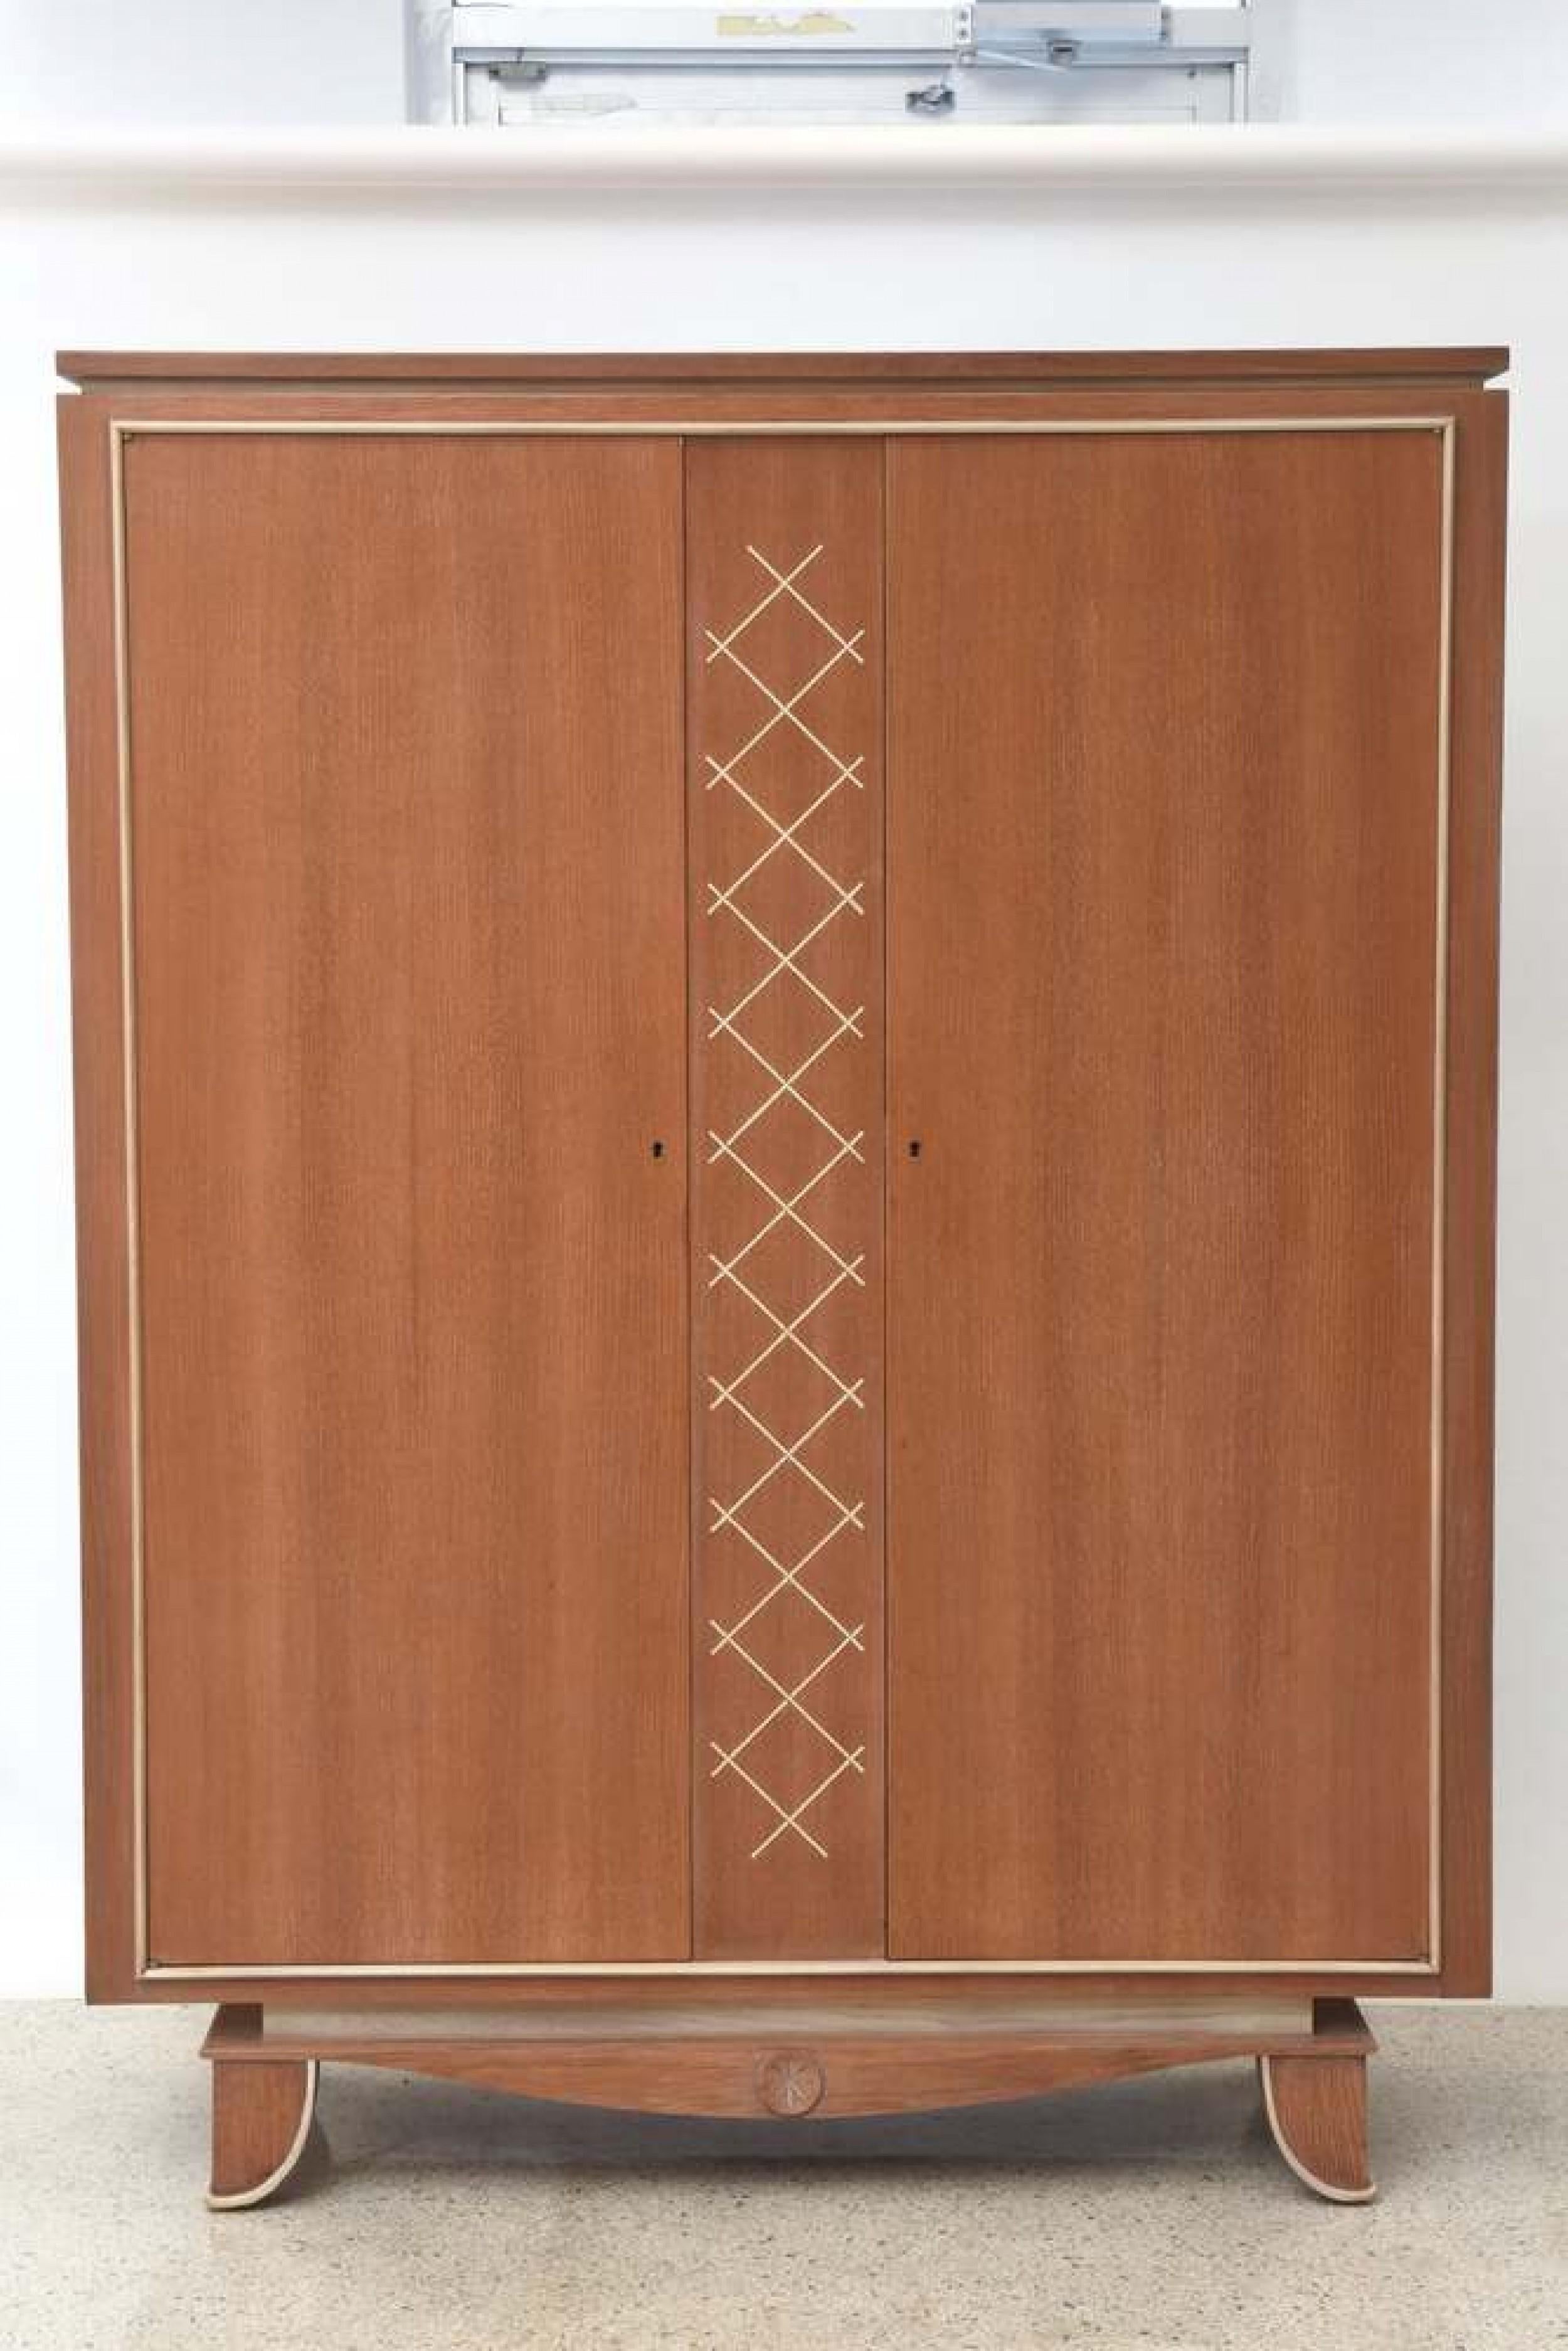 French Modern Limed Oak and Parchment Tall Cabinet, 1940s (PIERRE PETIT).